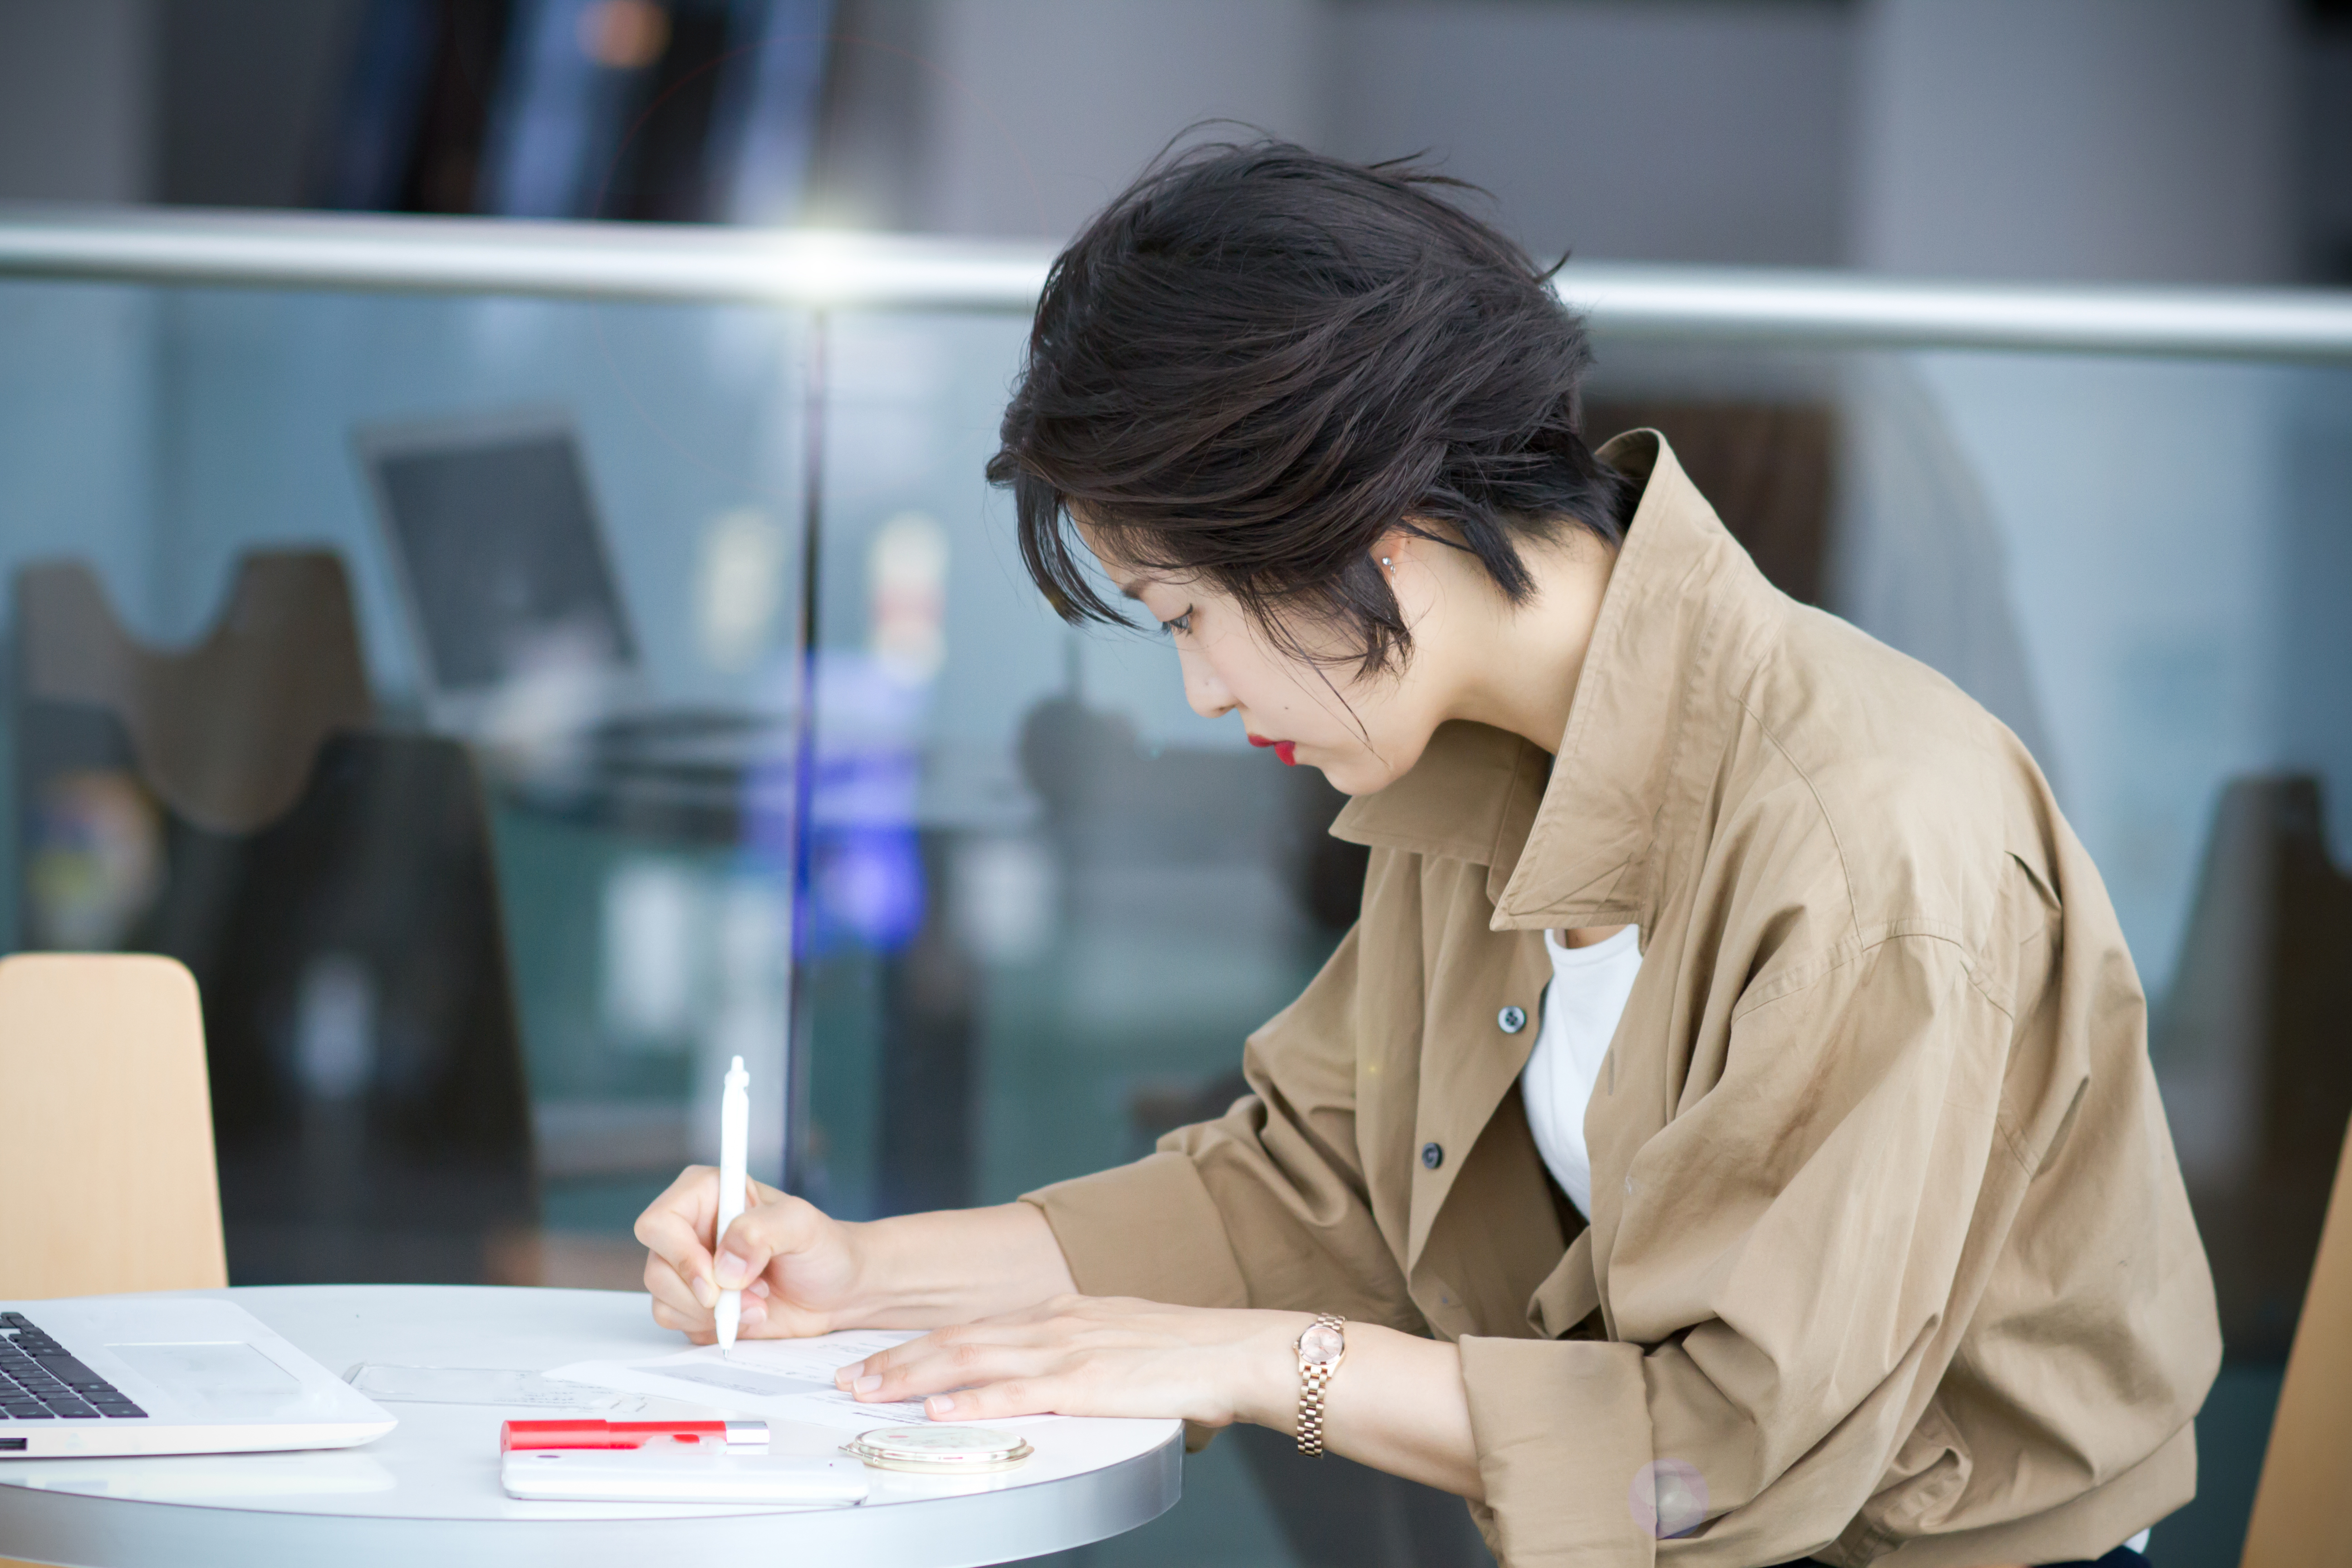 Woman taking notes at her desk.